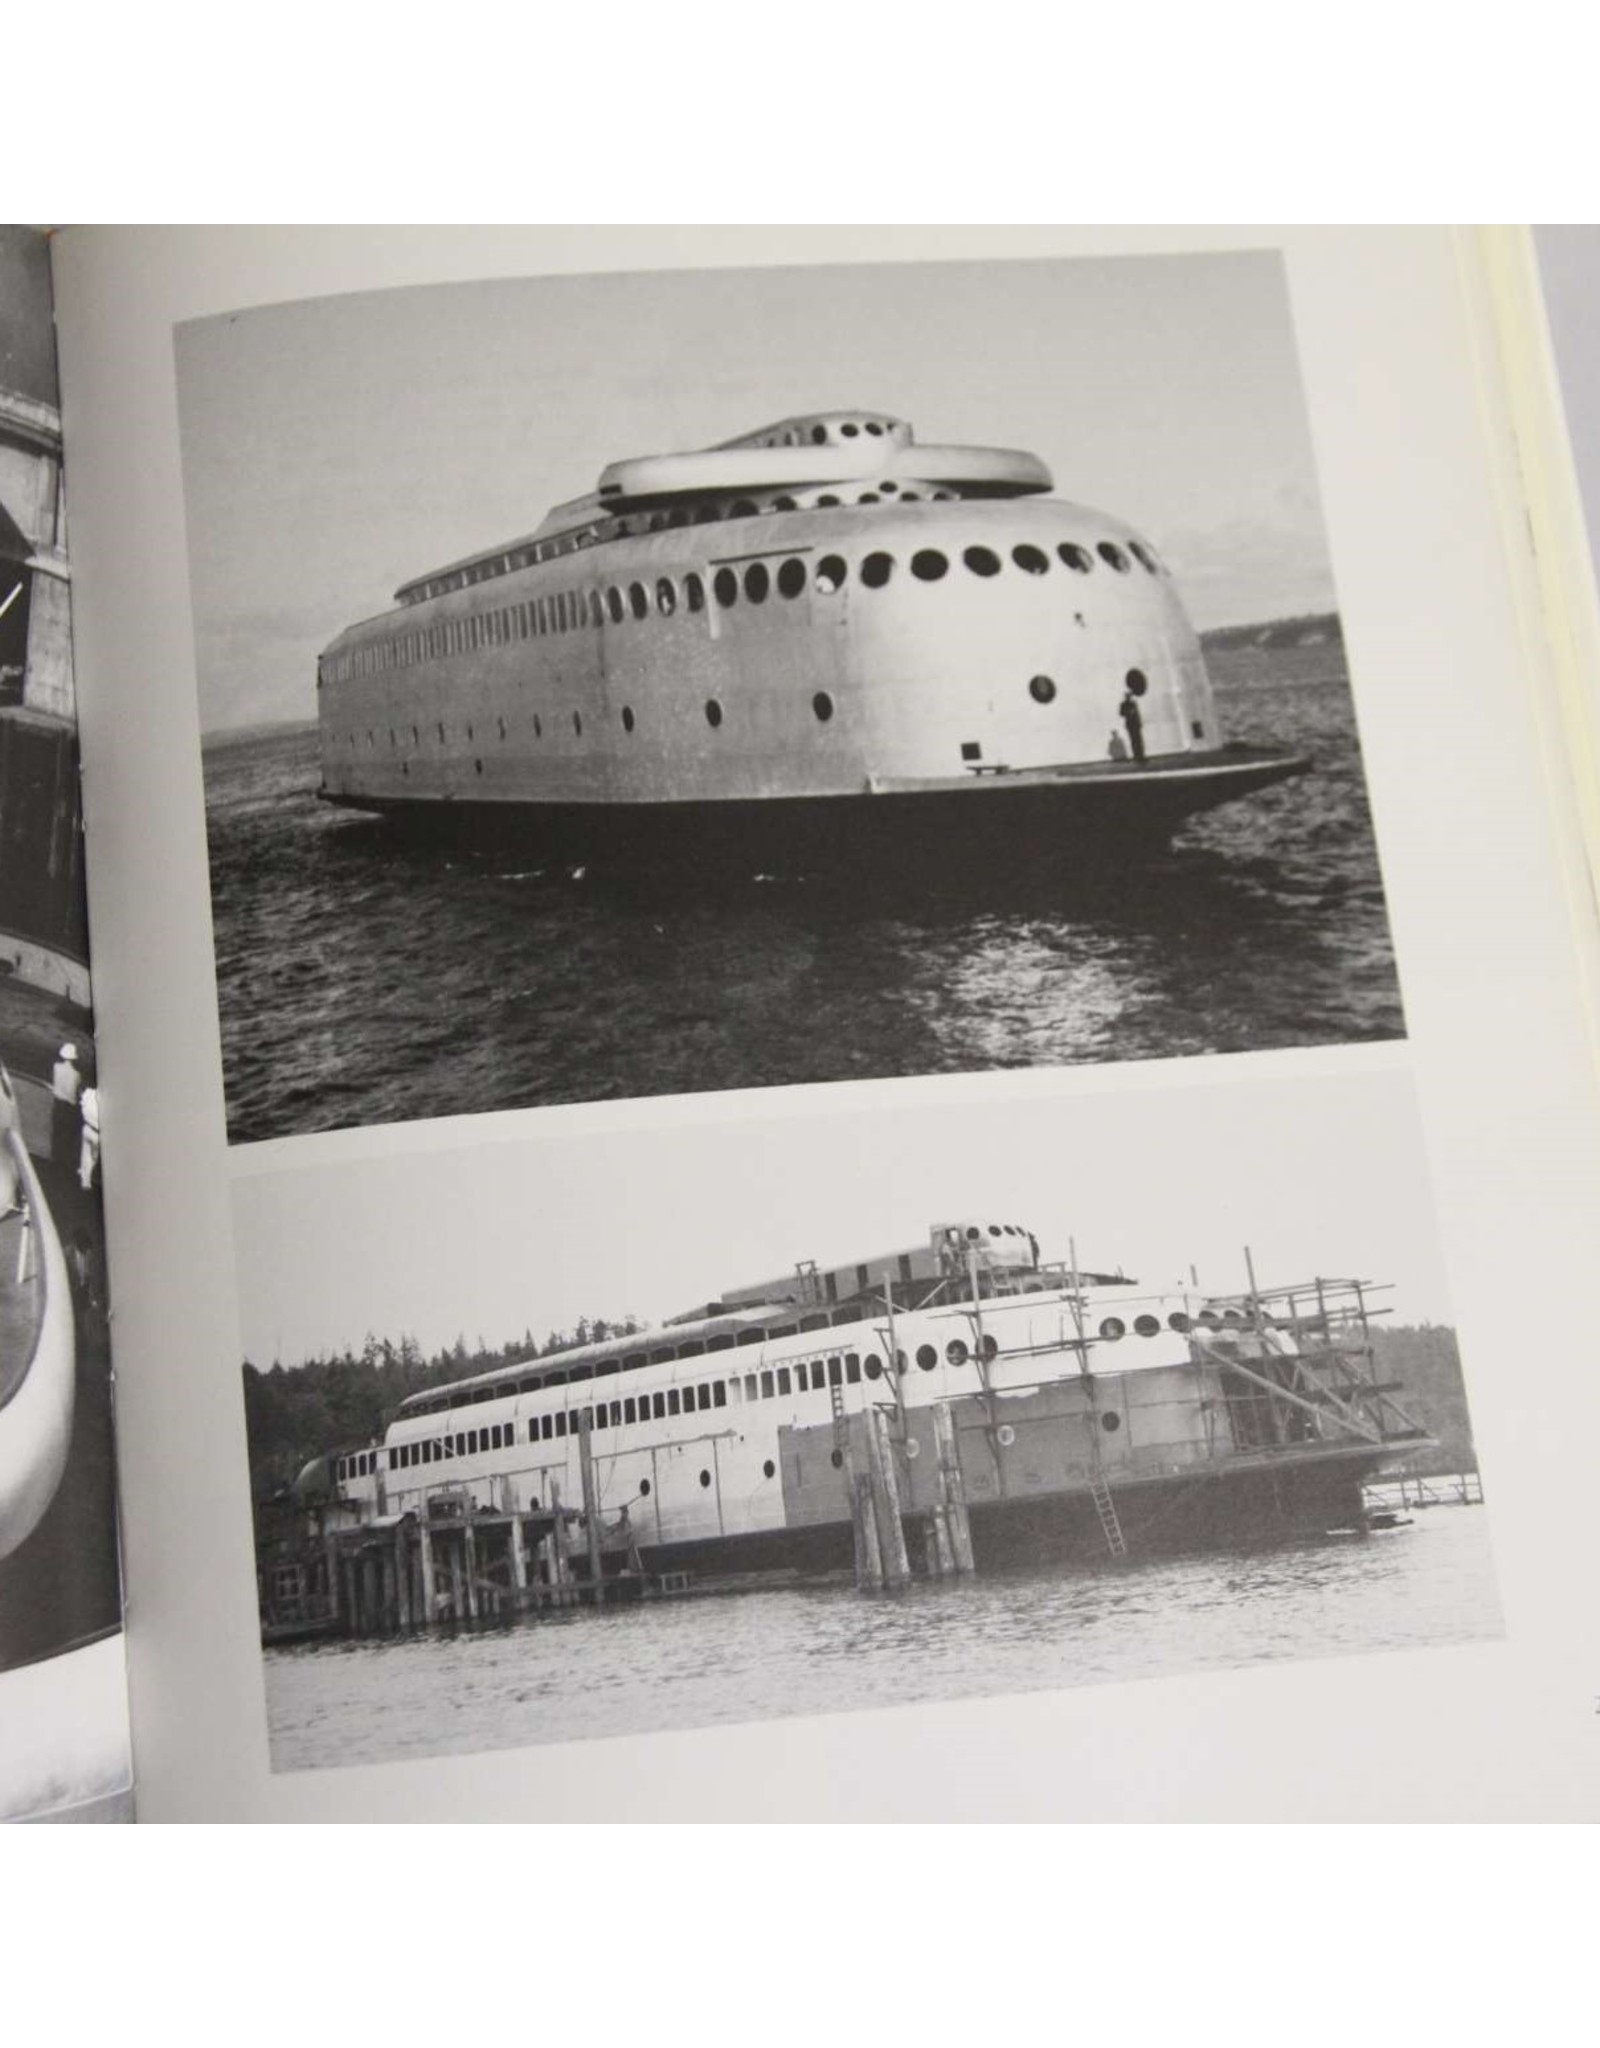 Hardcover book - A Legend on Puget Sound Ferryboats by Kline & Bayless, 1983